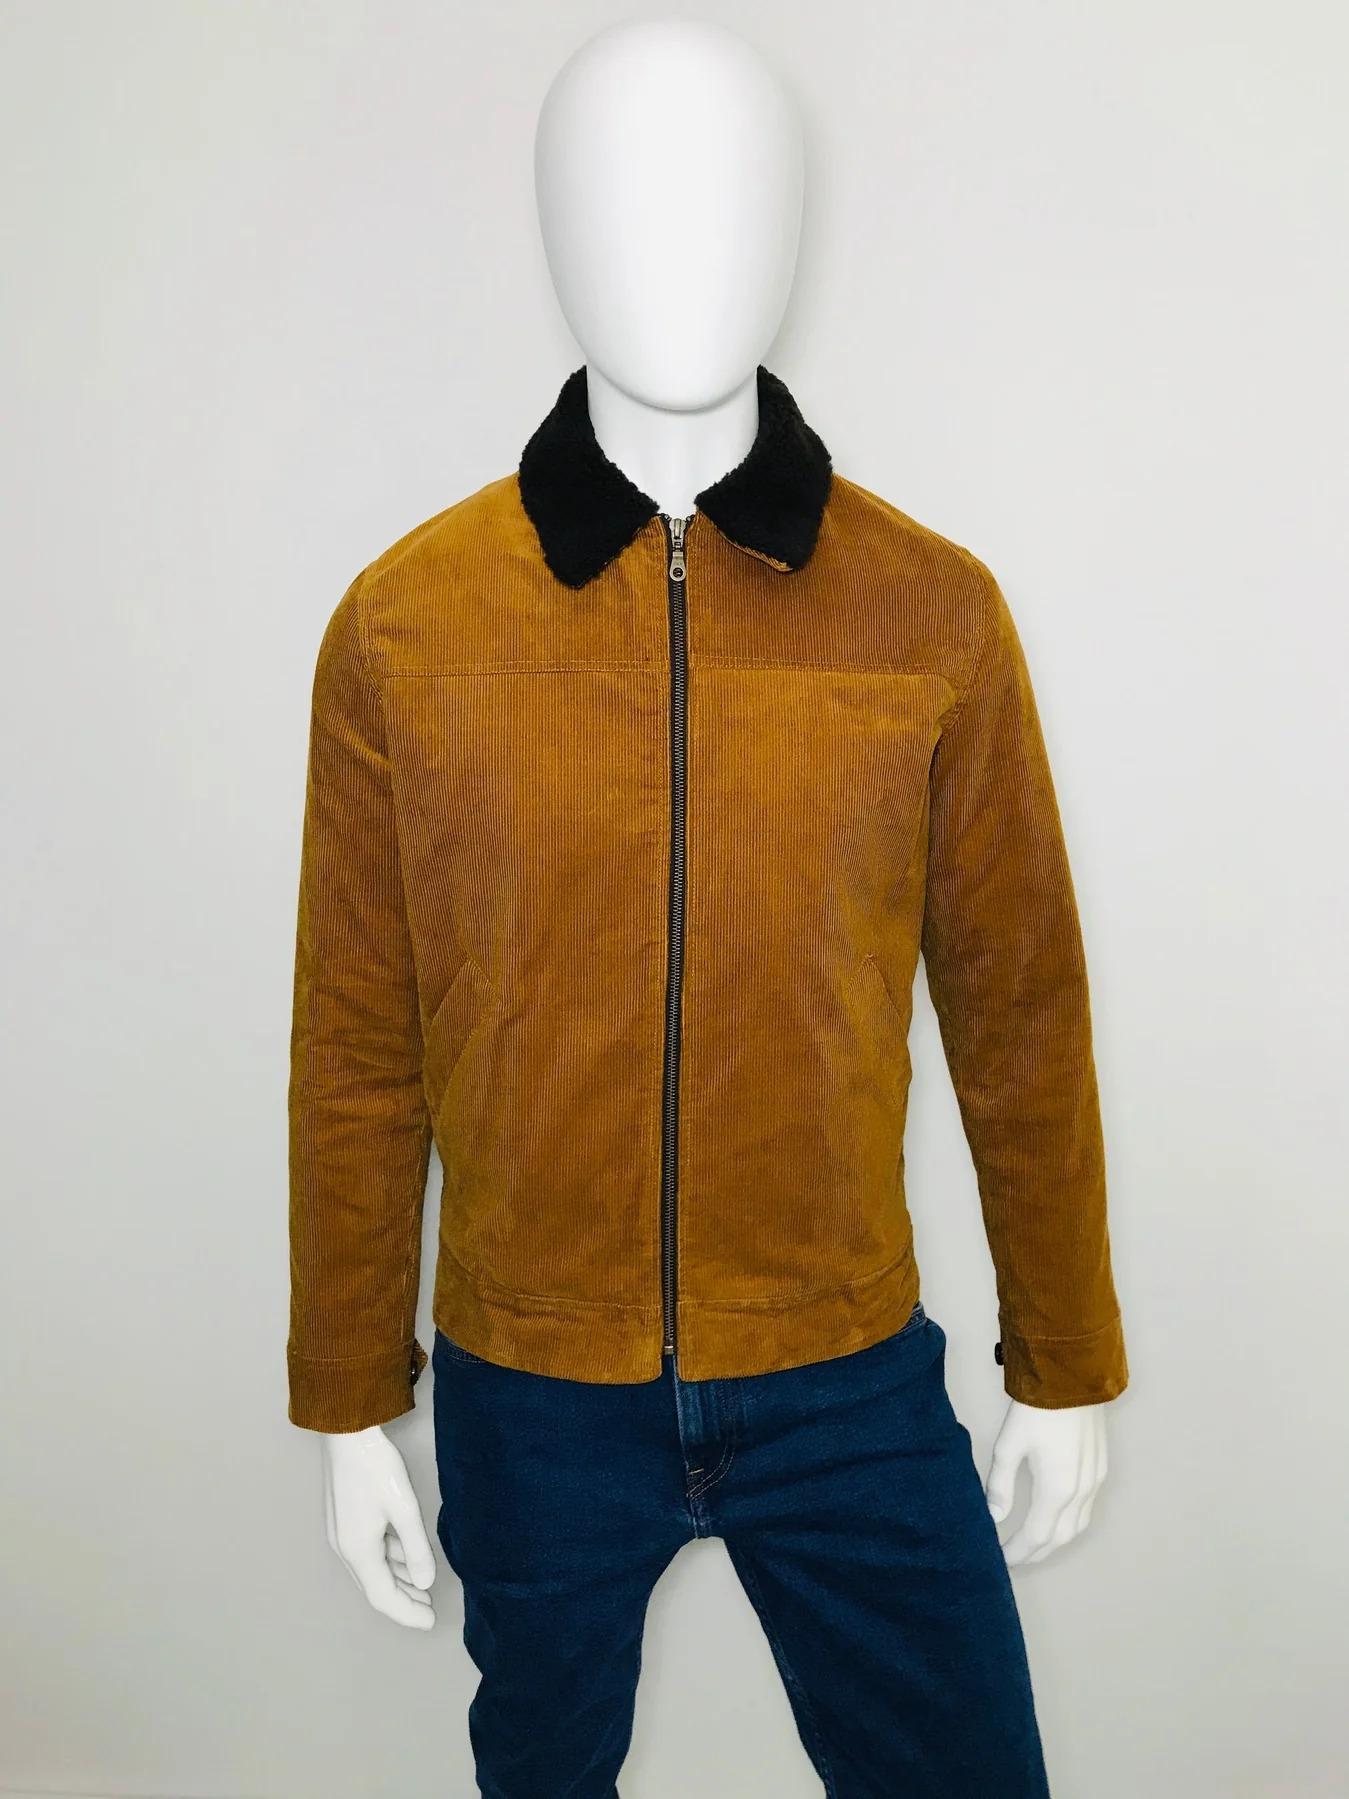 Percival Corduroy Jacket

Mustard coloured with black collar, centre zip fastening, buttoned cuffs. Long sleeves, two side slit pockets.

Size - S - 01
Condition - Very Good
Composition - Cotton 